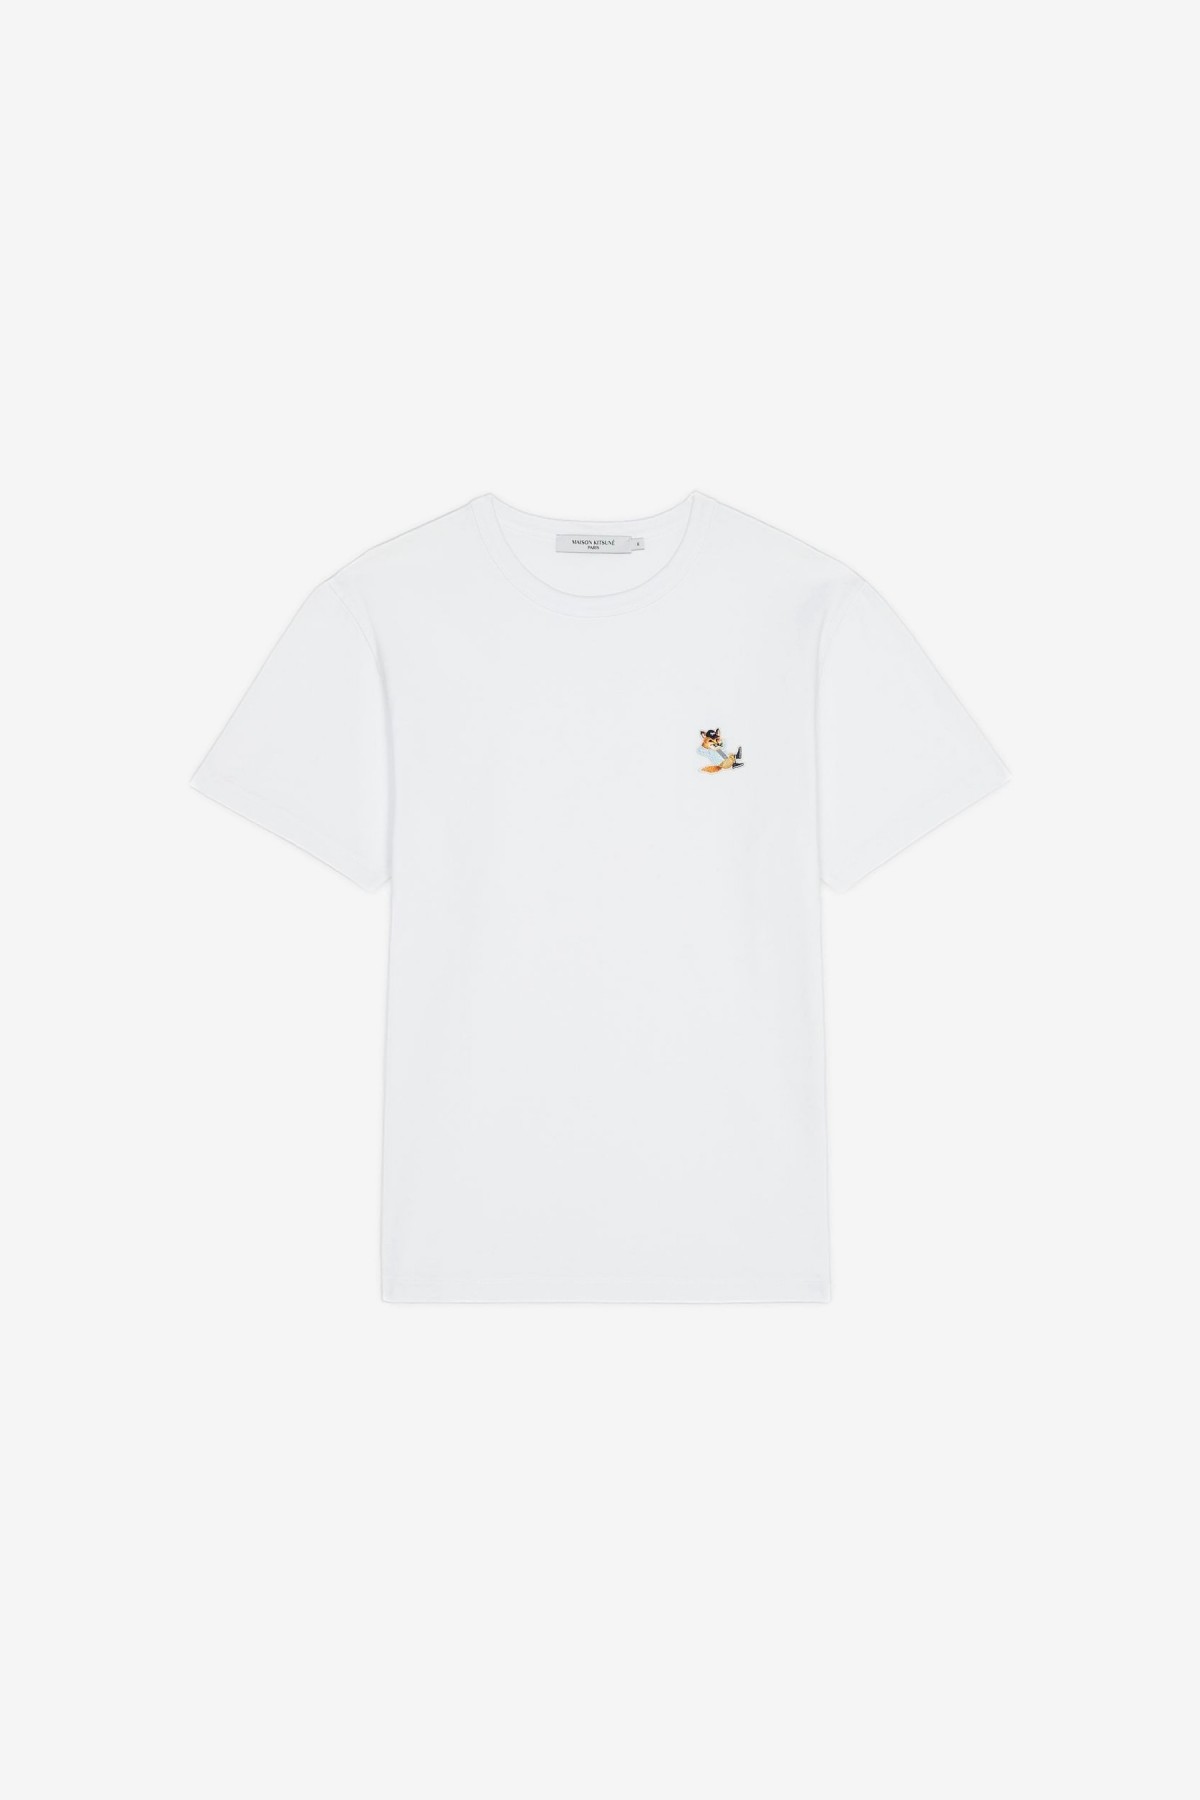 Maison Kitsuné Dressed Fox Patch Classic Tee-Shirt in White